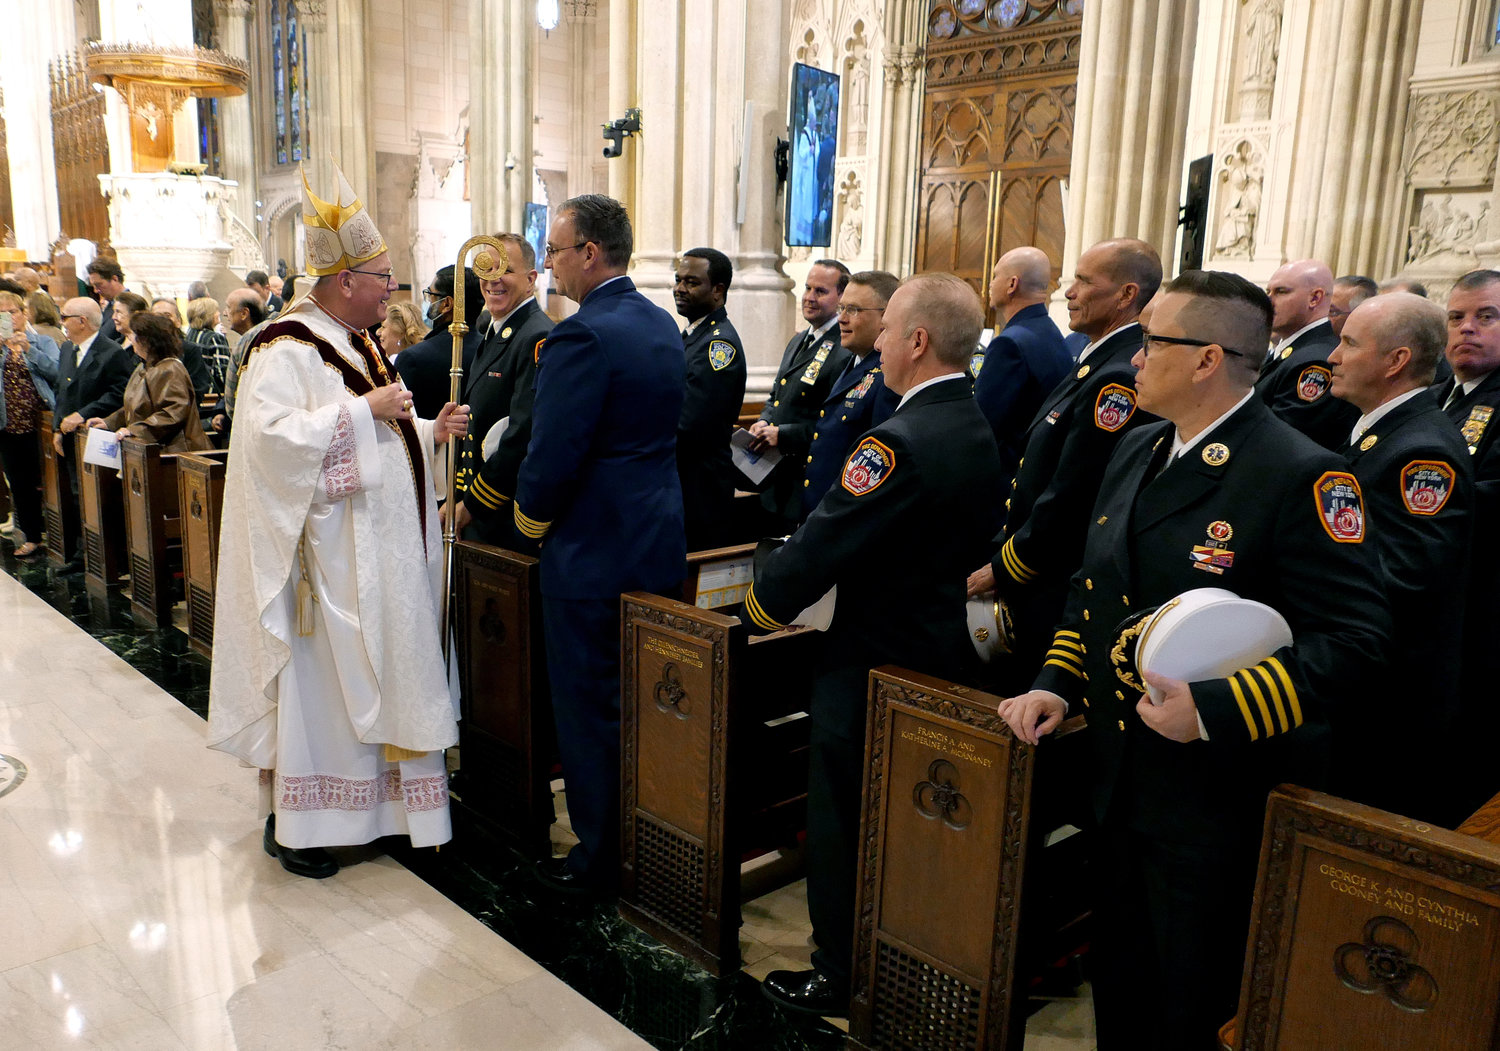 Cardinal Dolan greets members of the FDNY who protect and serve the people of New York following the annual Guardian Mass at St. Patrick’s Cathedral Oct. 1.